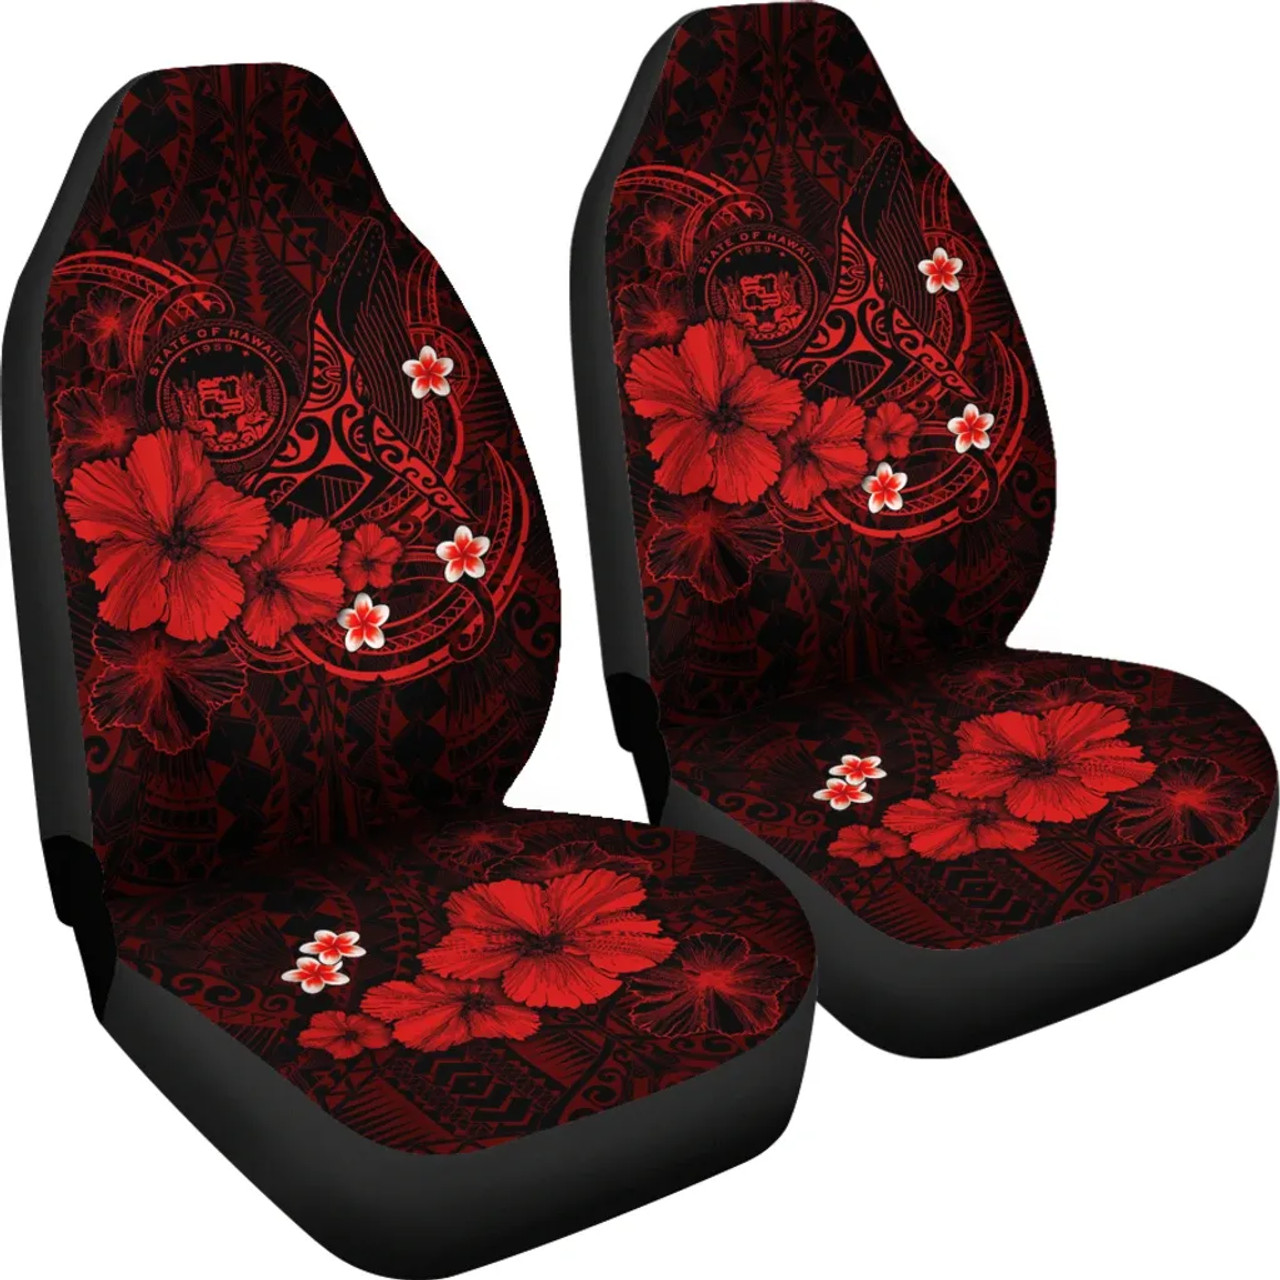 Polynesian Hawaii Car Seat Covers - Humpback Whale with Hibiscus (Red)